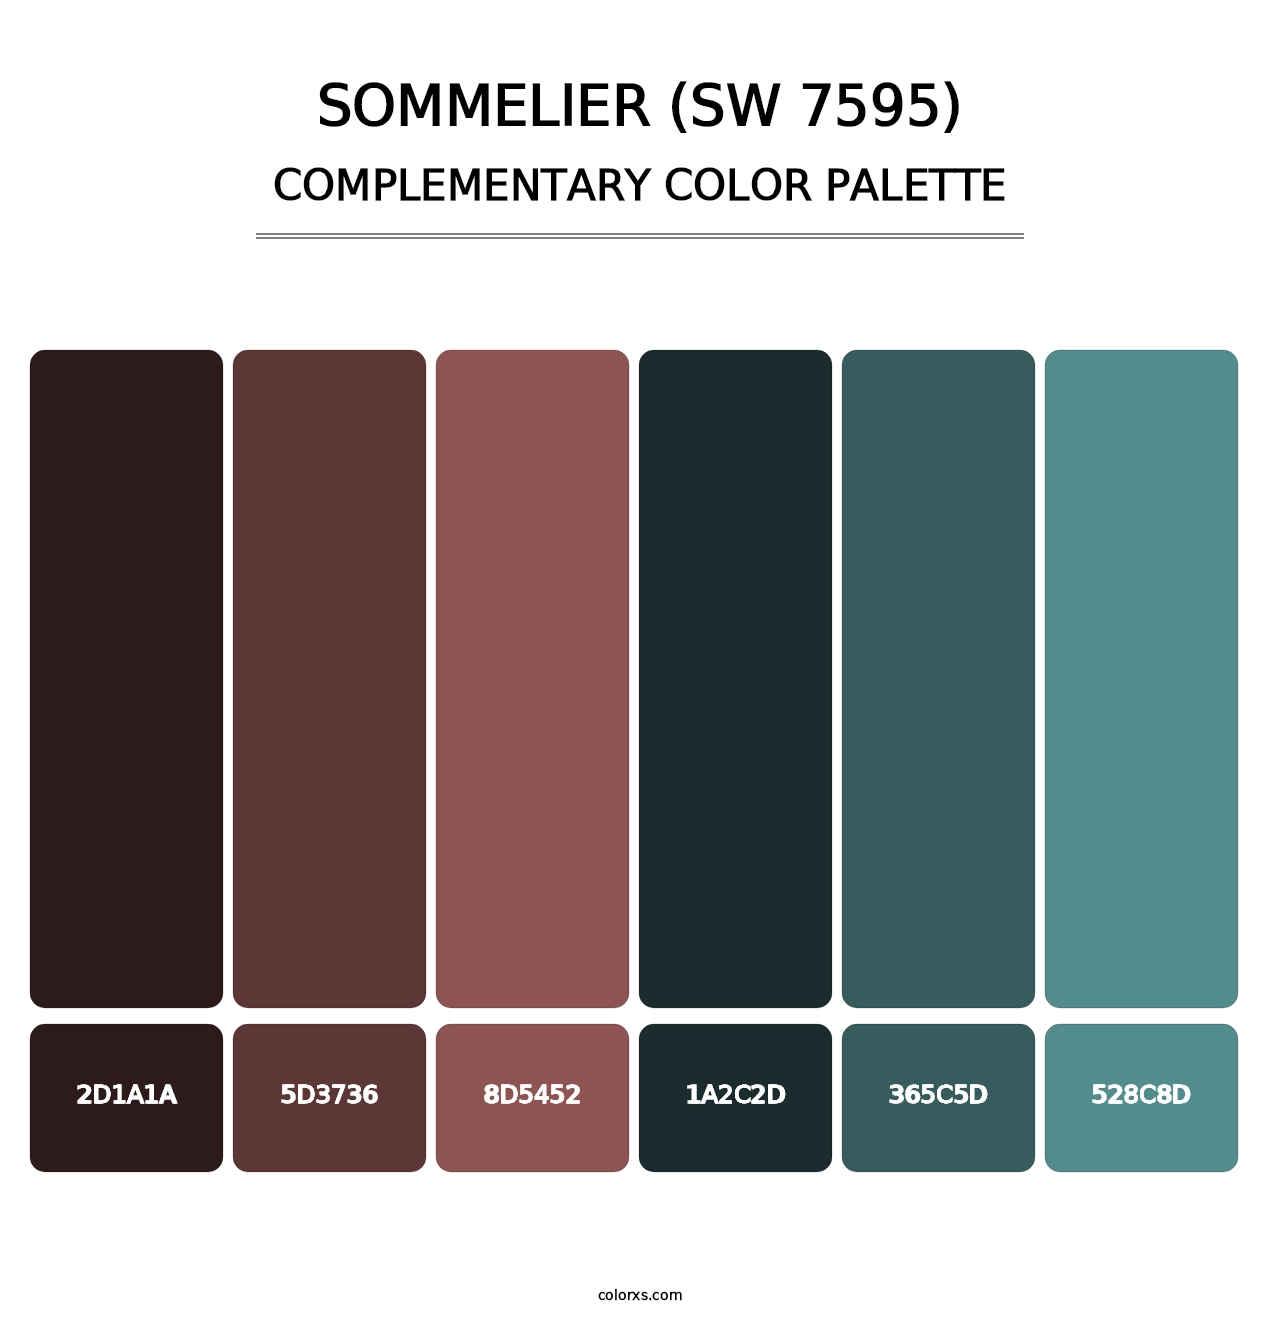 Sommelier (SW 7595) - Complementary Color Palette